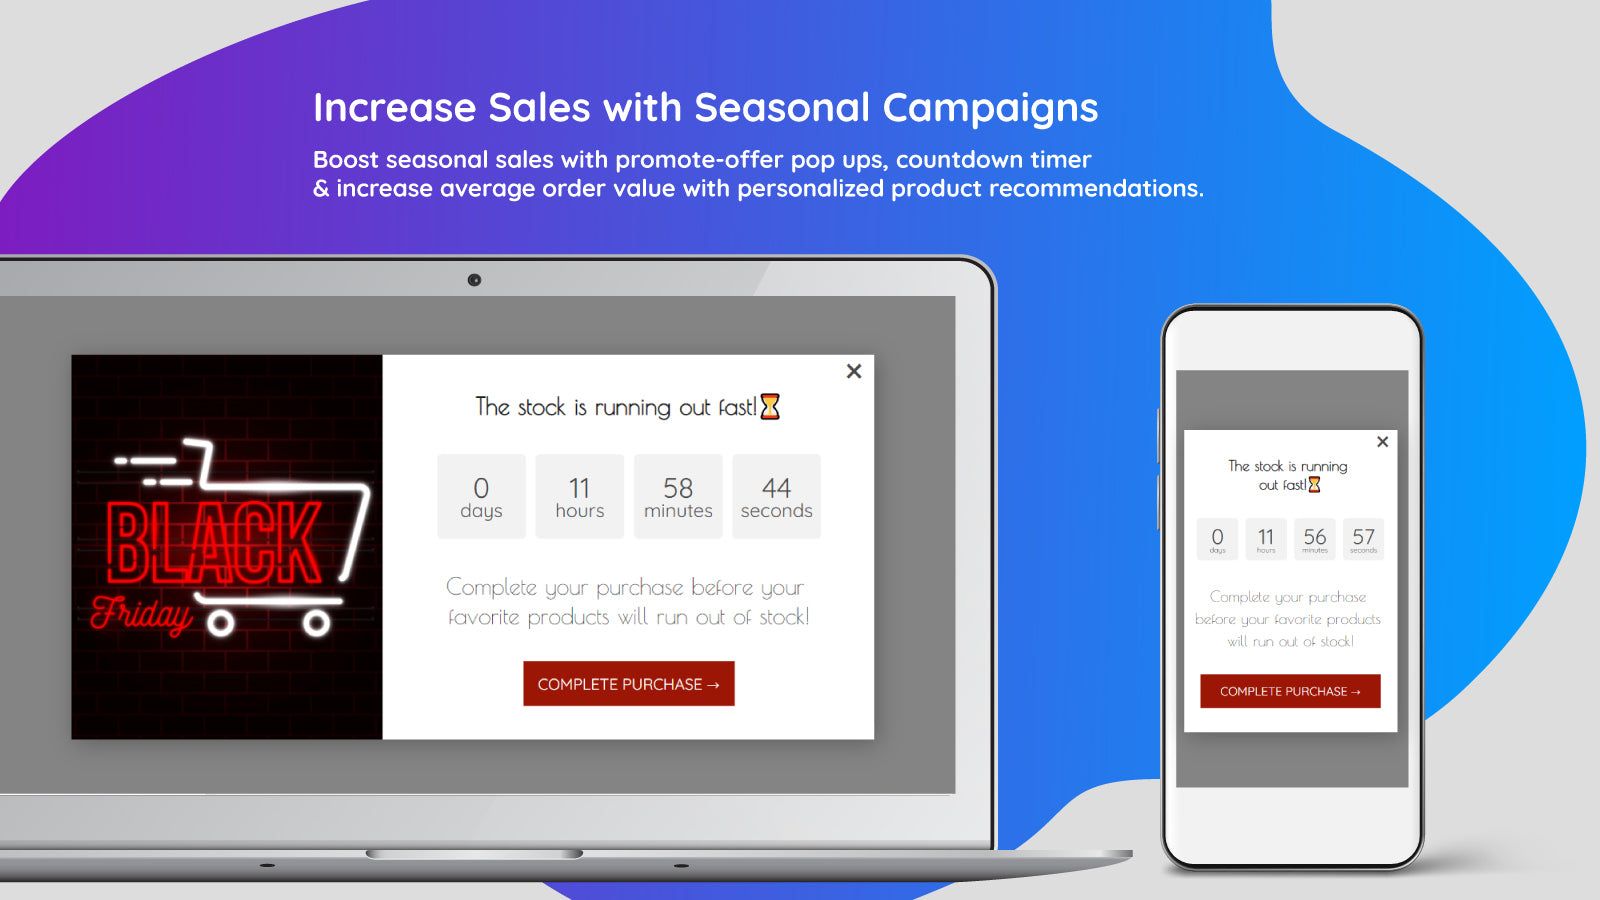 Promote-offer pop ups and countdown timers.